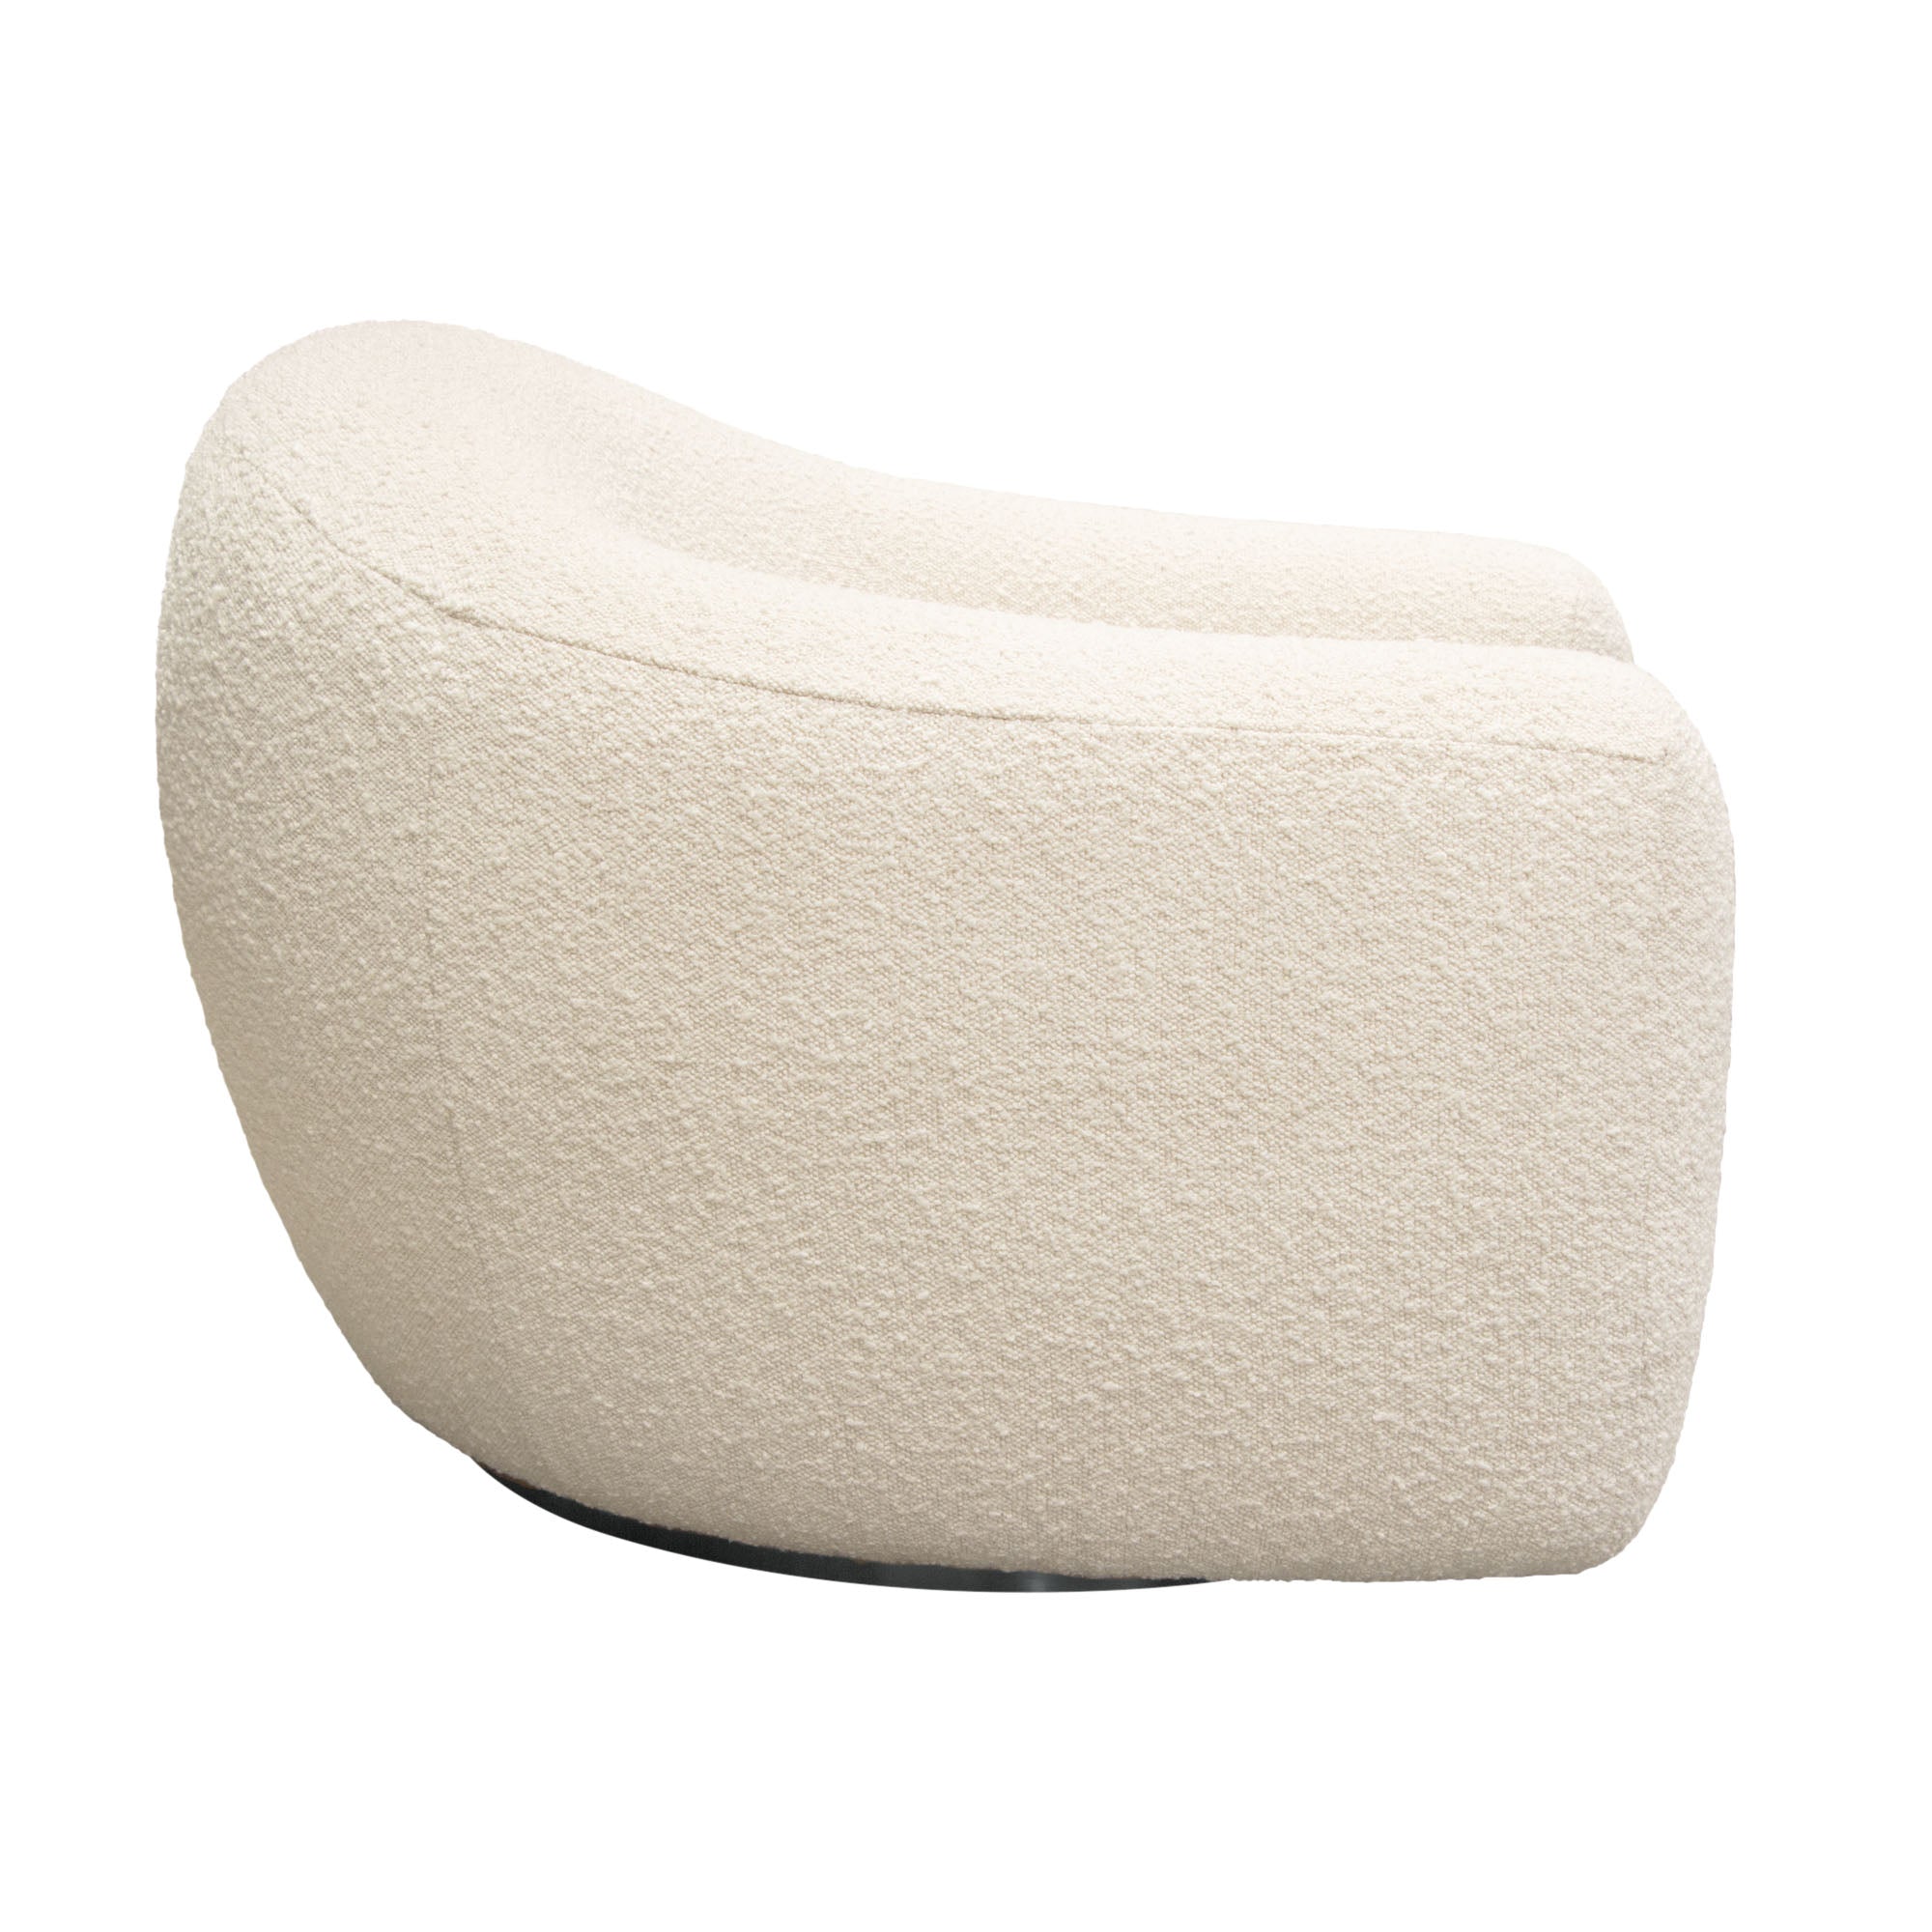 Diamond Sofa Pascal Swivel Chair in Bone Boucle Textured Fabric with Contoured Arms & Back